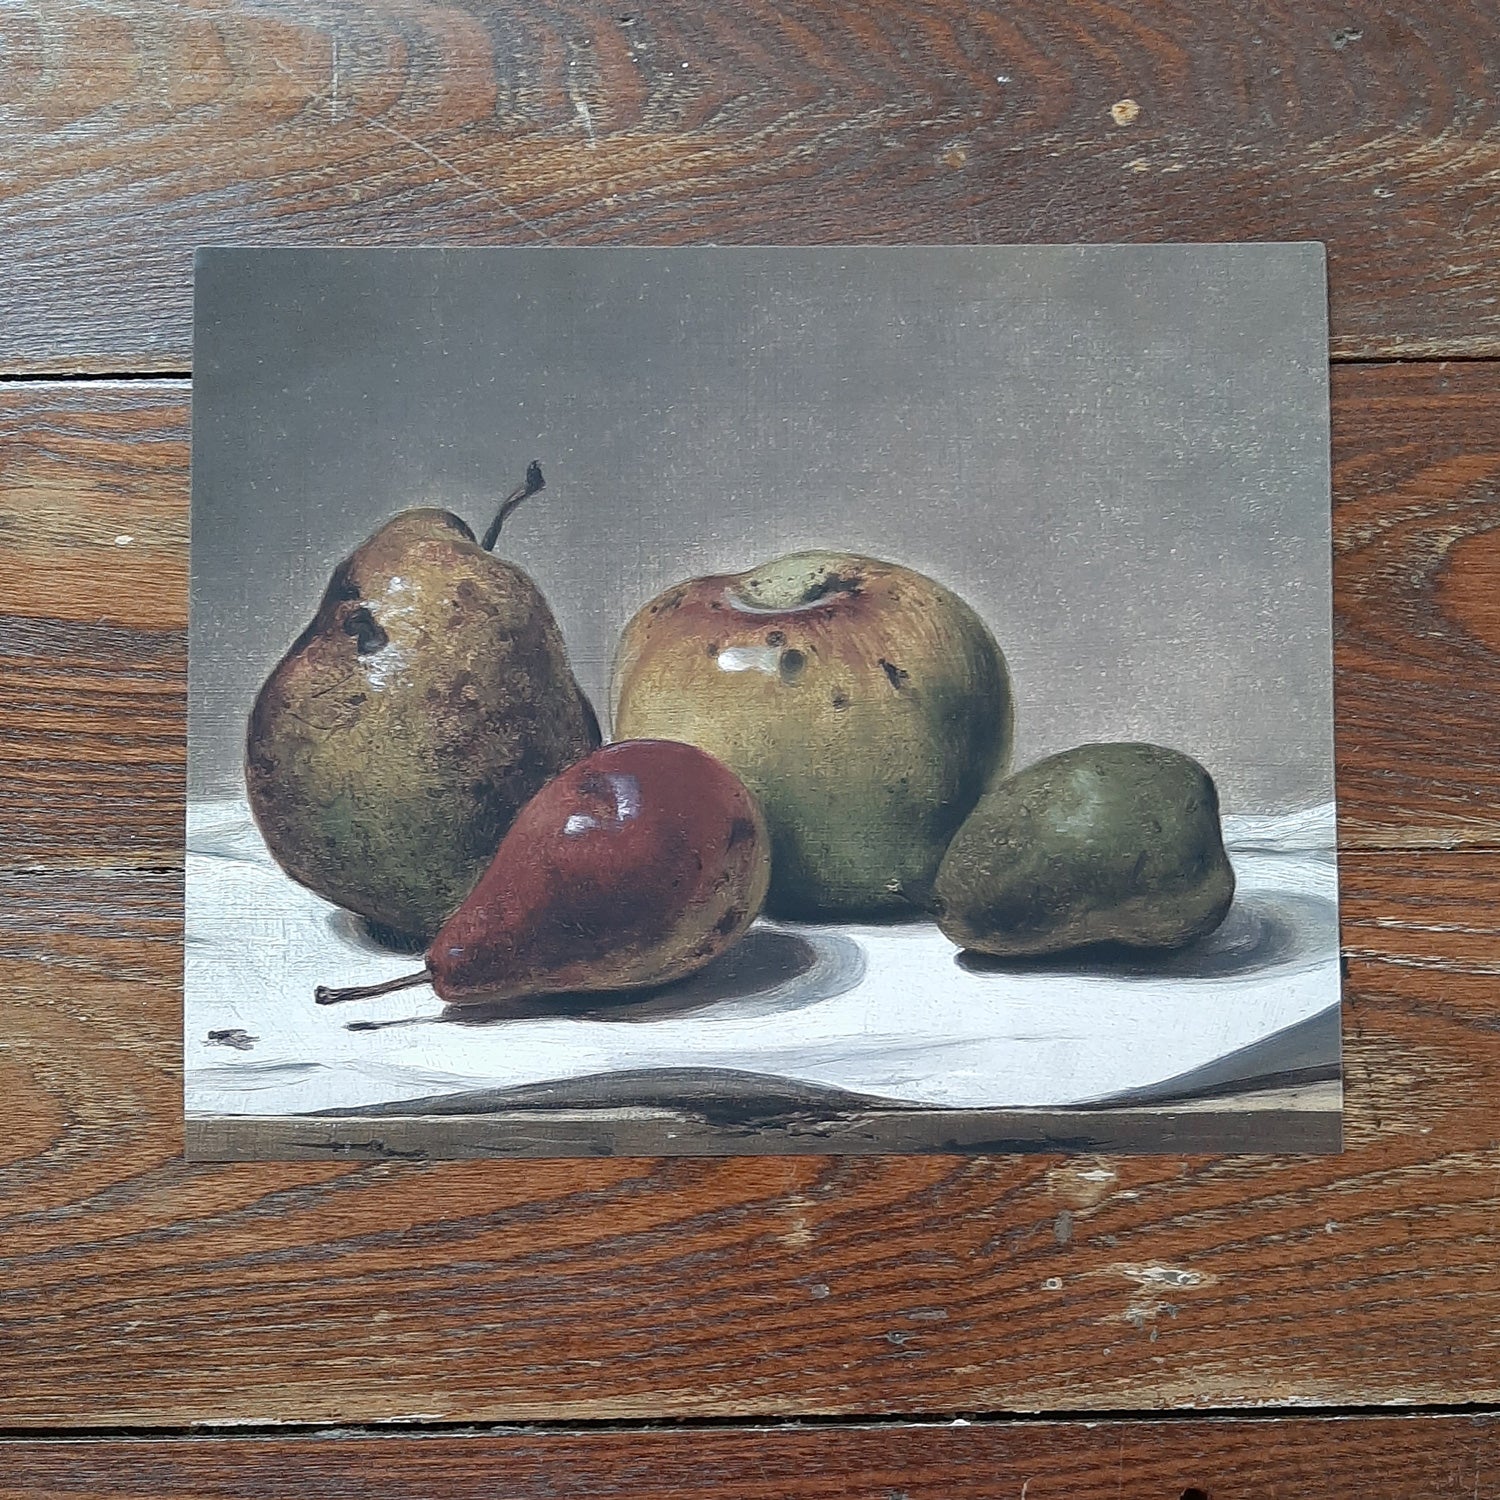 This Vintage Art Print, Still Life with Fruit adds an enchanting charm to any room. Maroon, browns, and dark greens blend together to create this dreamy still-life. The art is printed on high quality card stock with archival ink. Original art has been digitally retouched to preserve characteristics, grain and cracks. Image size: 10"x 8". Print only. No frame included.